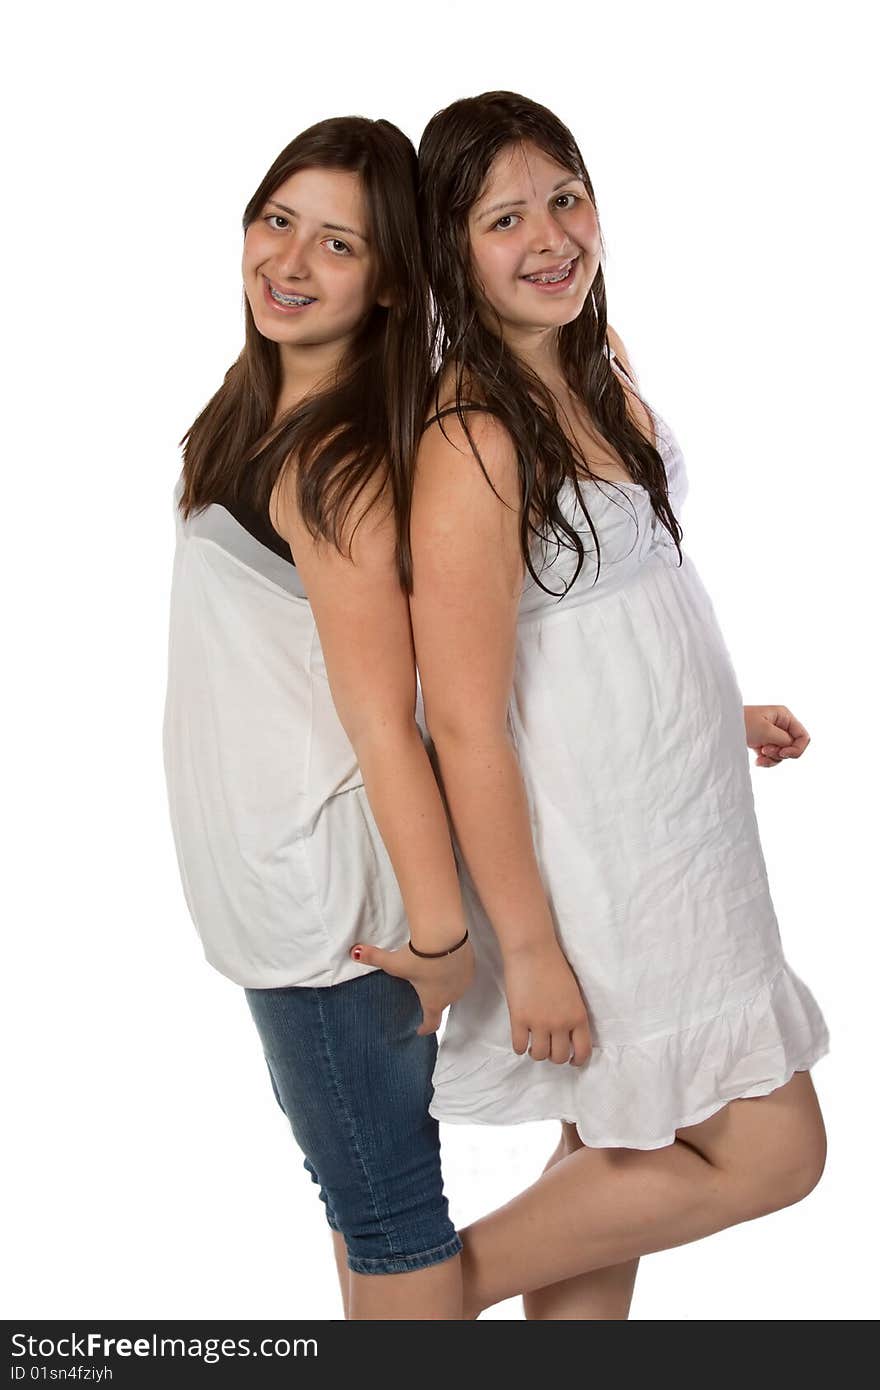 Two identical twin sisters with long brown hair smiling standing over white